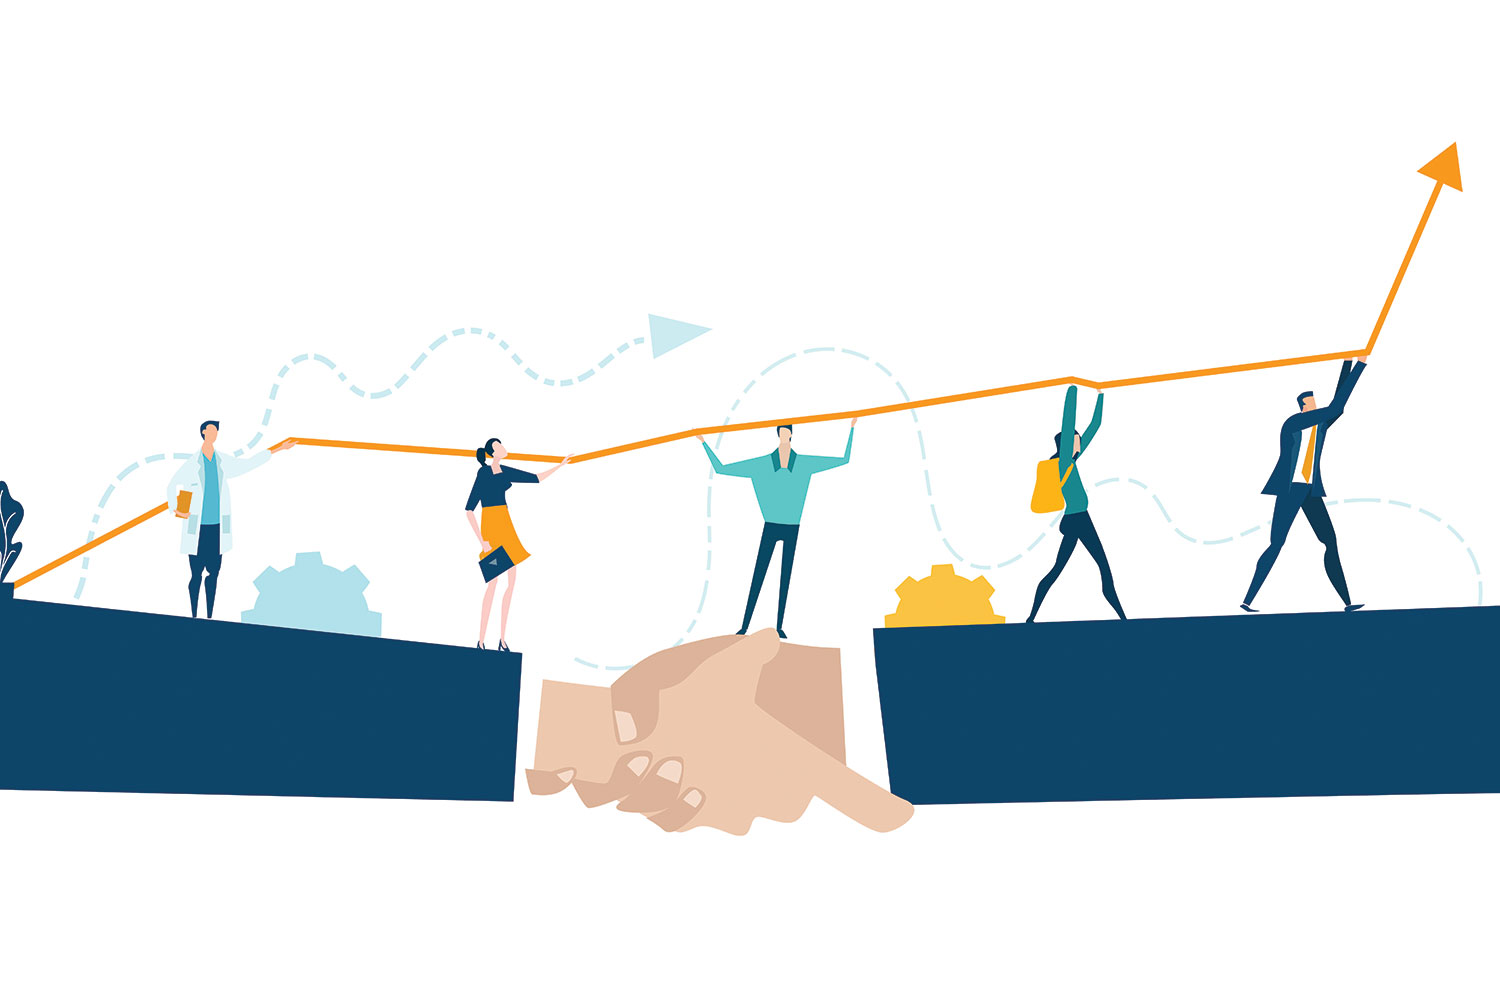 graphic of cartoon people standing on suited arms shaking hands and holding an graph/arrow line trending upwards